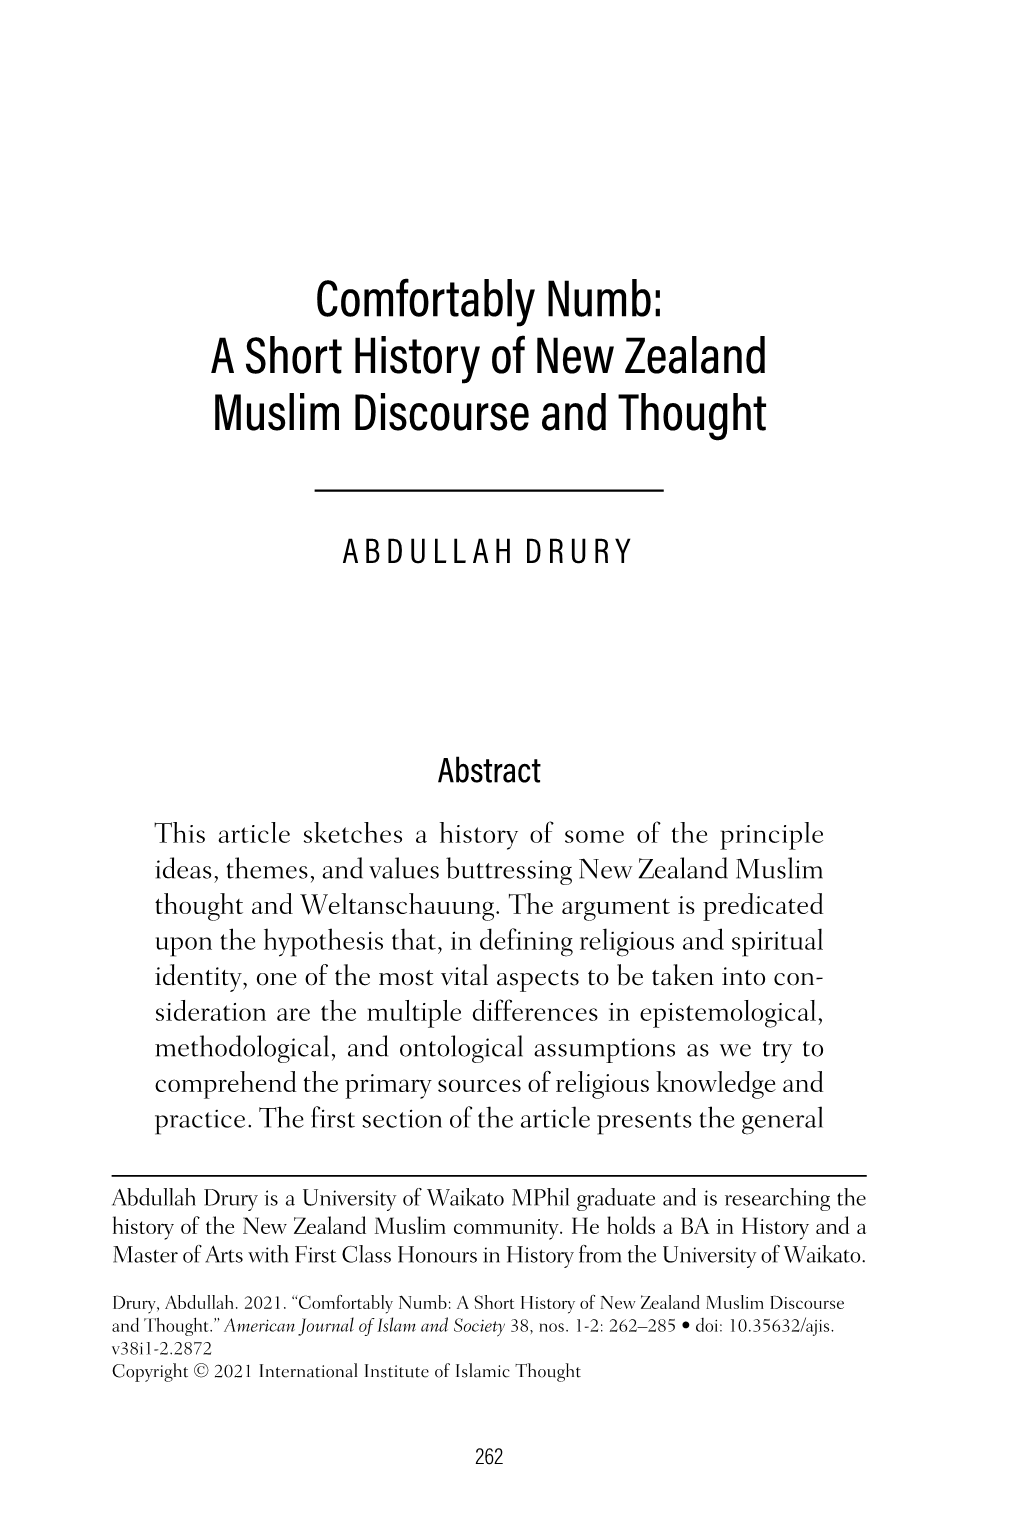 American Journal of Islam and Society.Indb